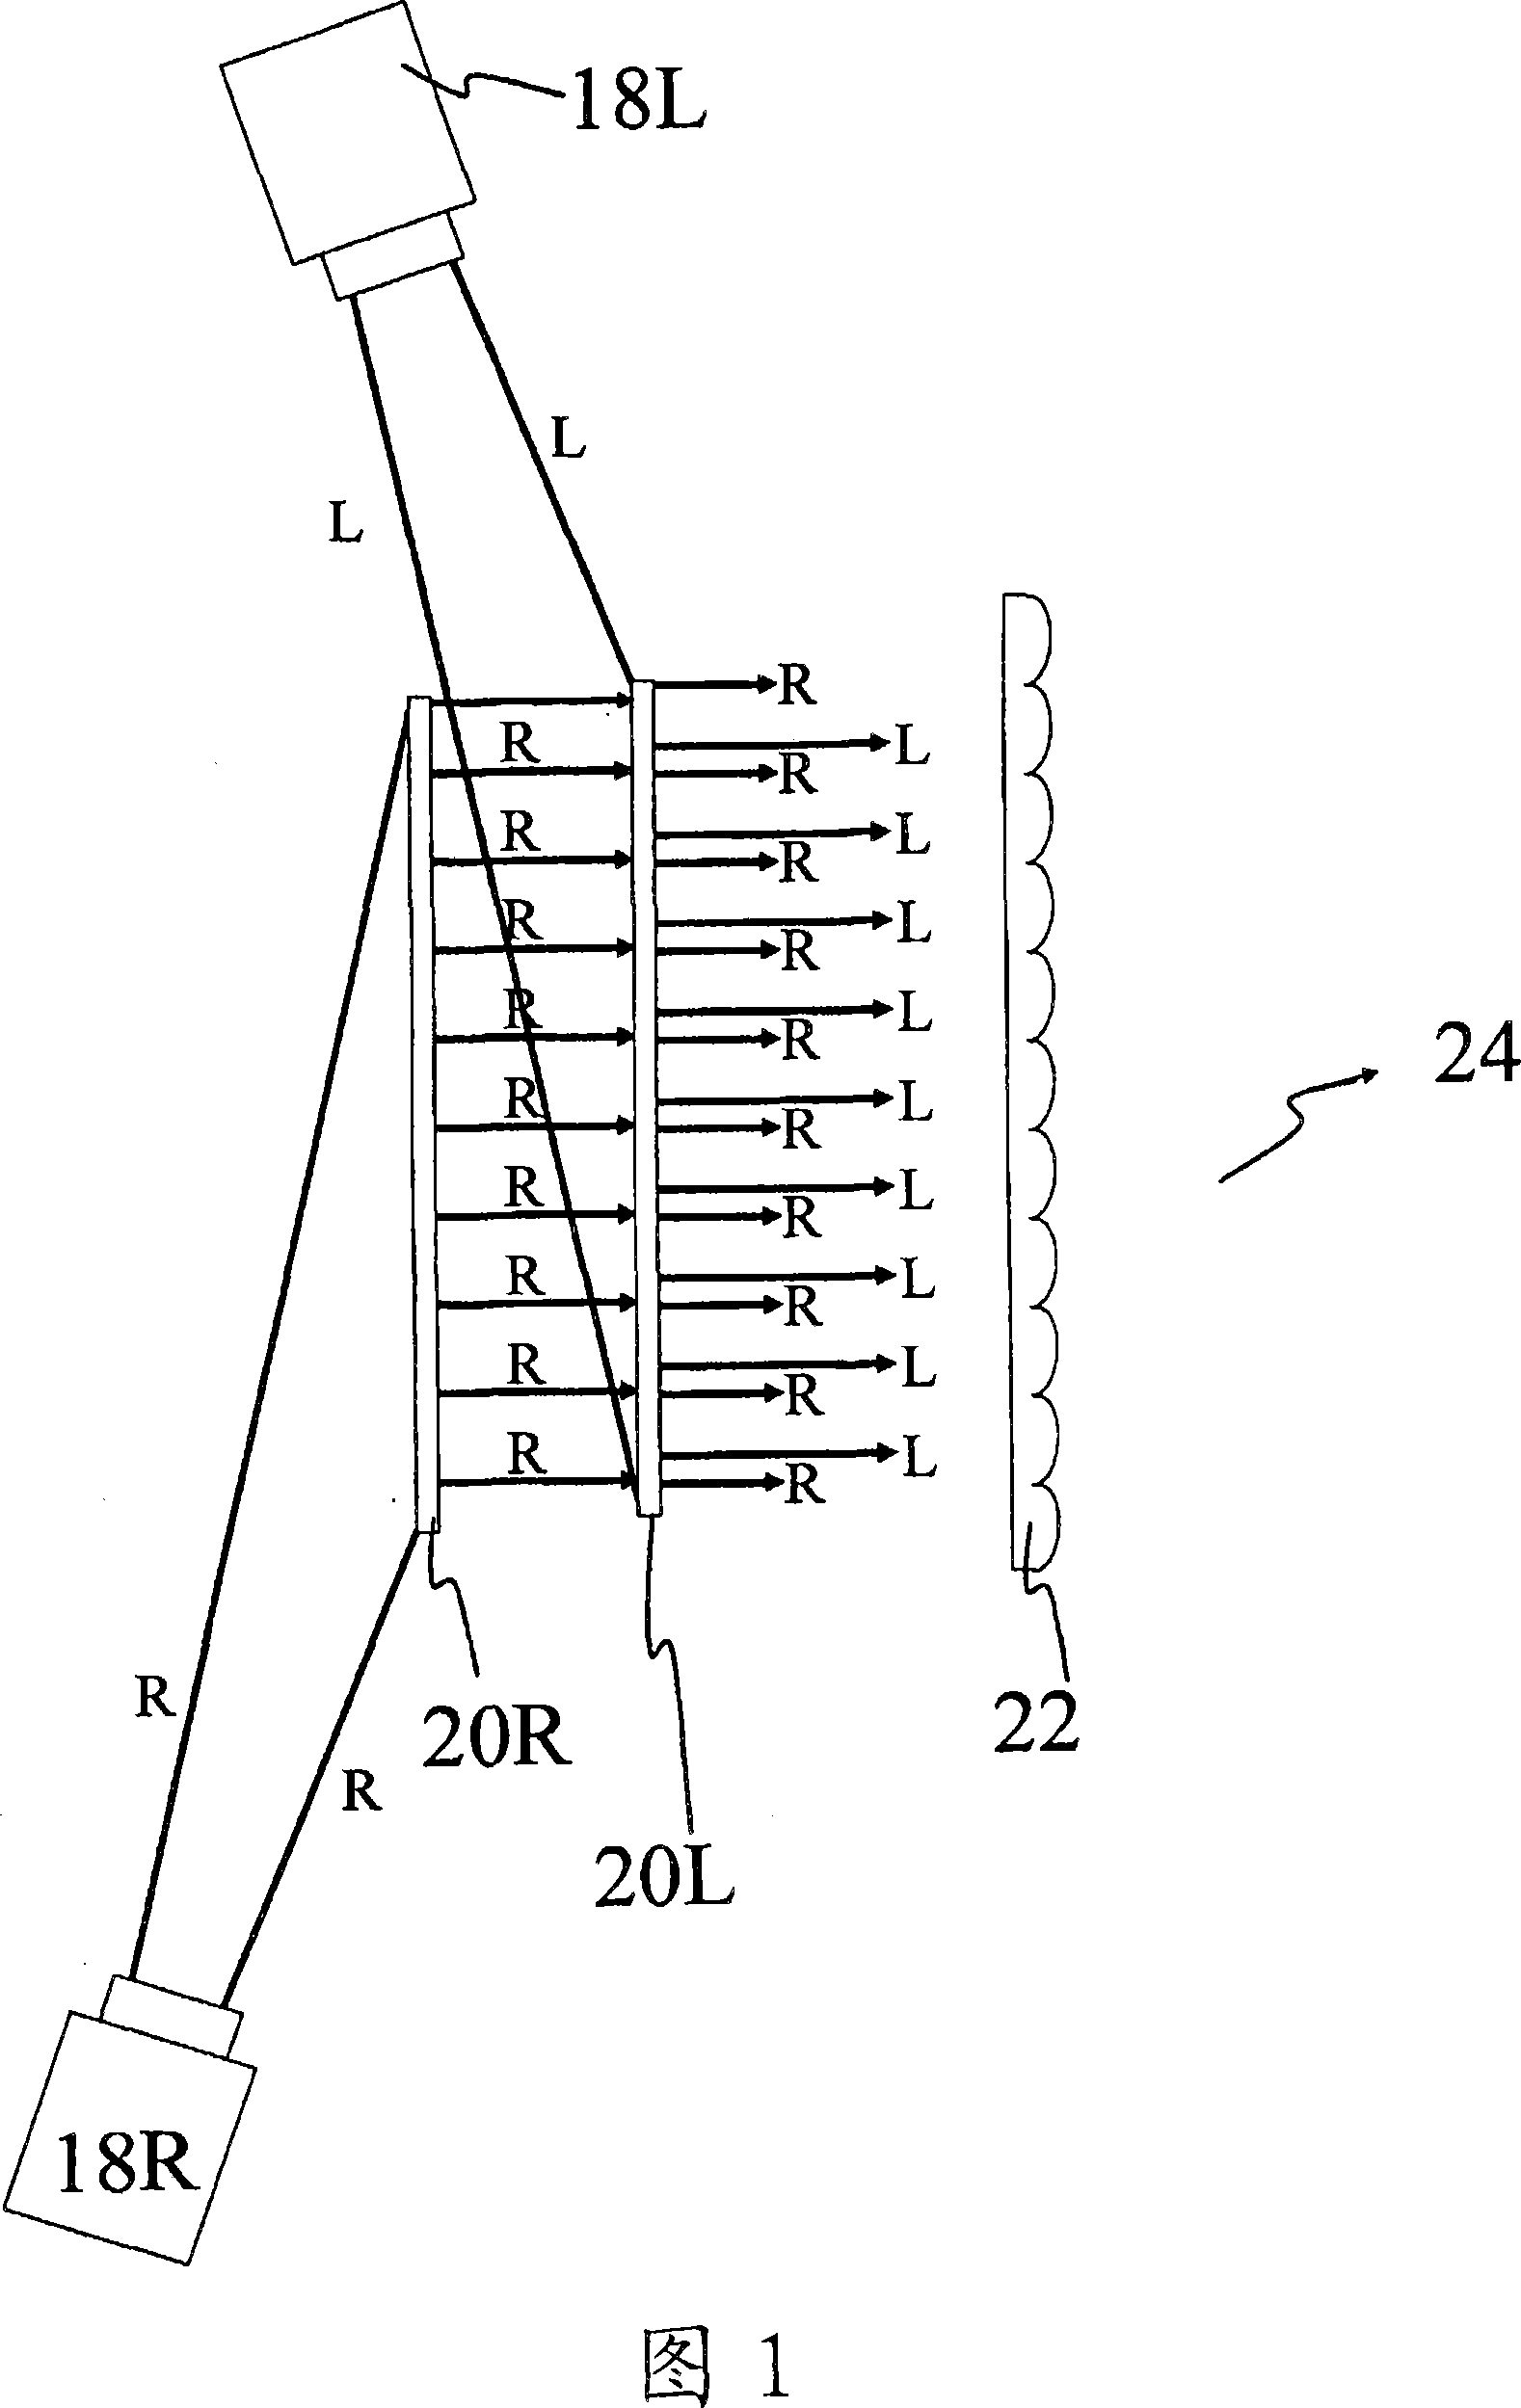 Autostereoscopic rear projection screen and associated display system